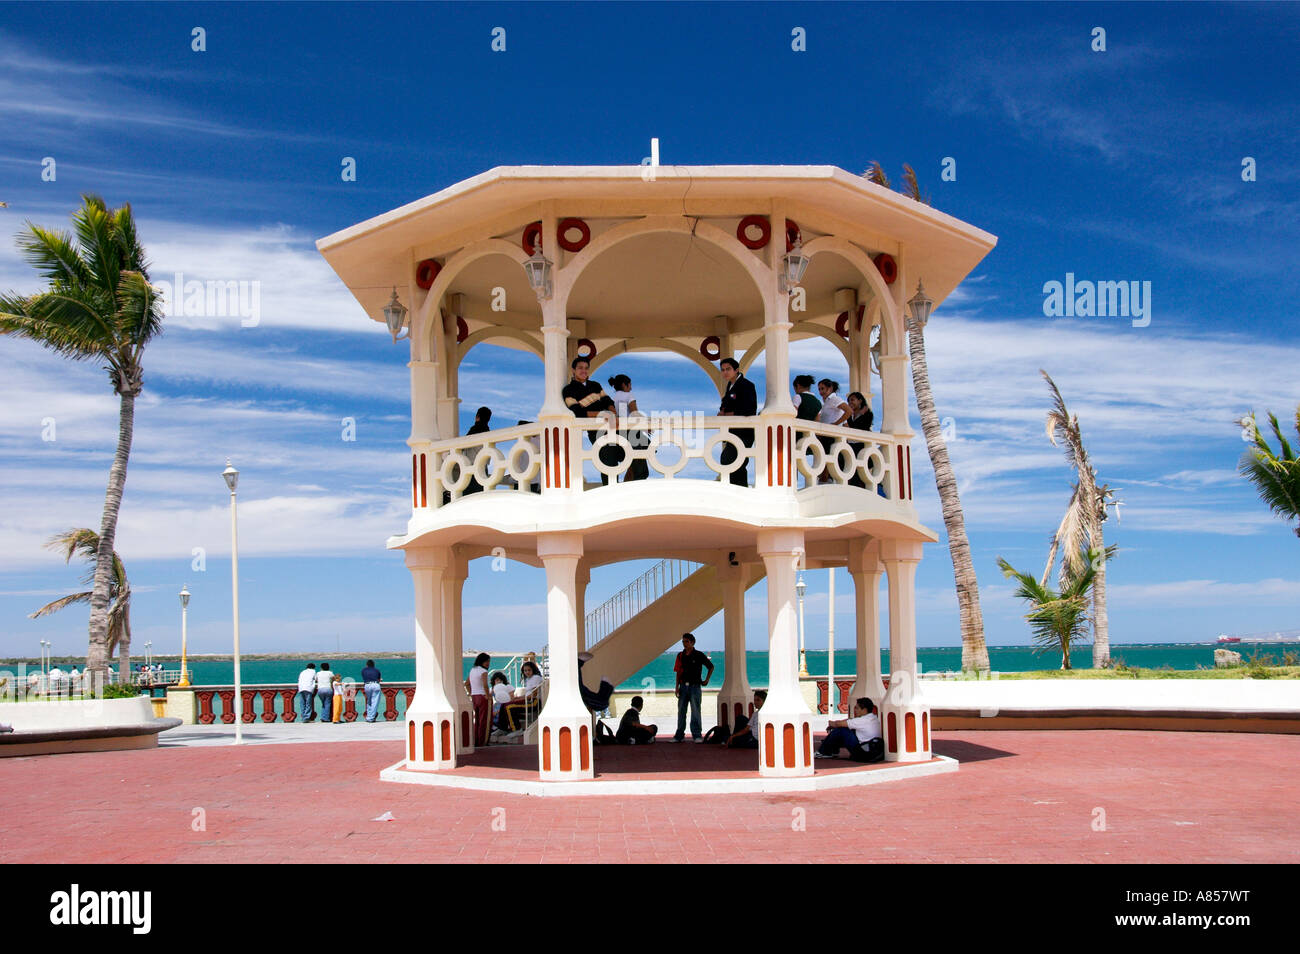 Young people enjoying the Queen's Pier along the malecon at La Paz Mexico Stock Photo